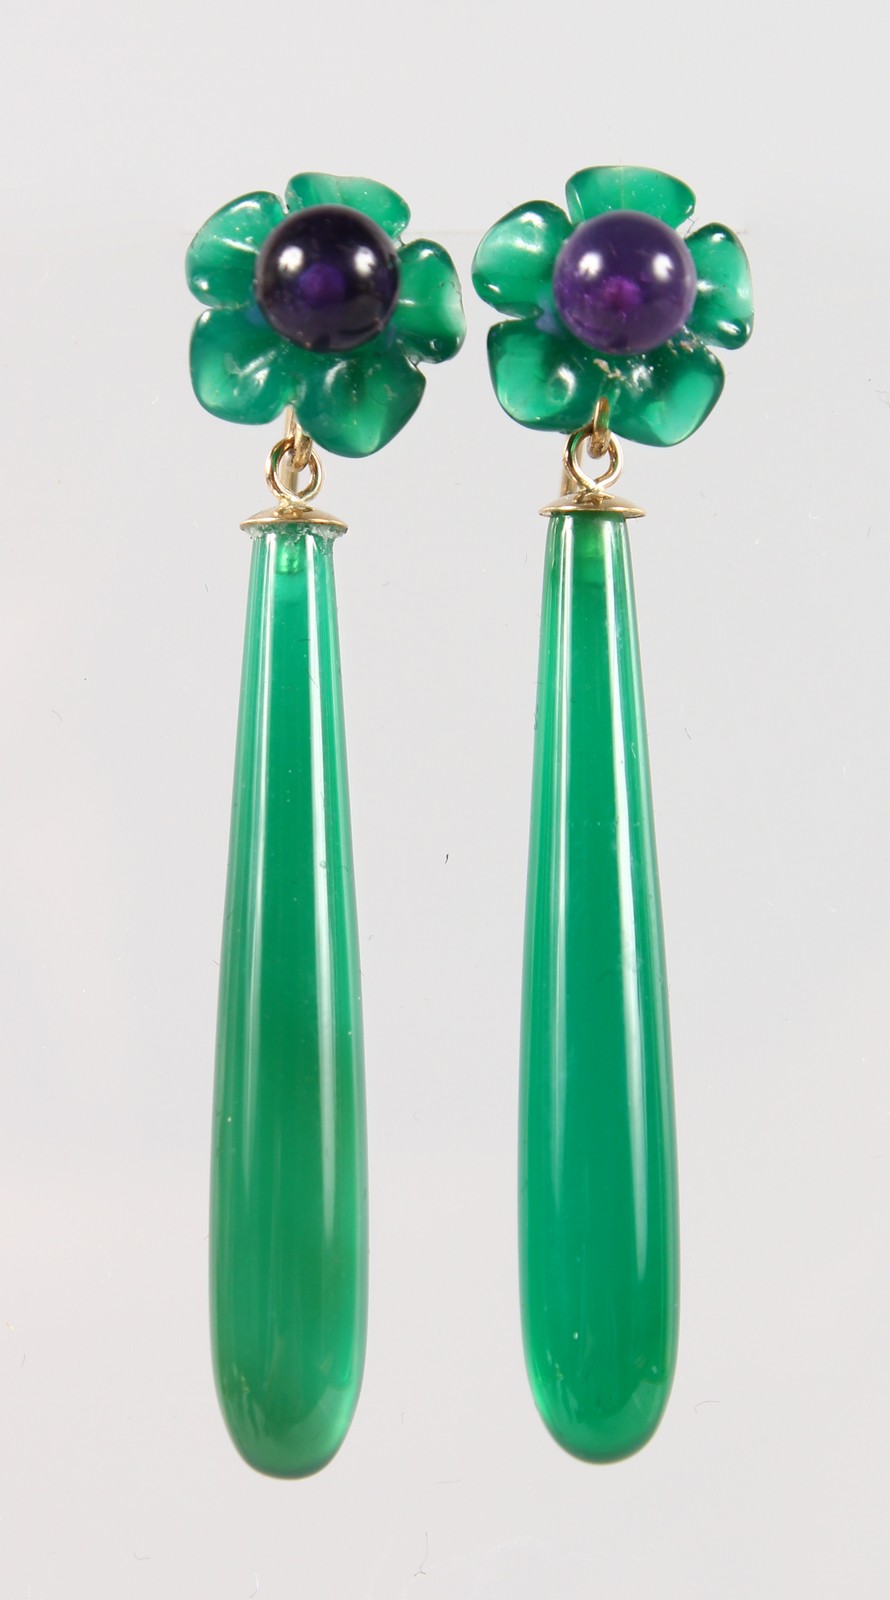 A PAIR OF 9CT GOLD, JADE AND AMETHYST DROP EARRINGS.